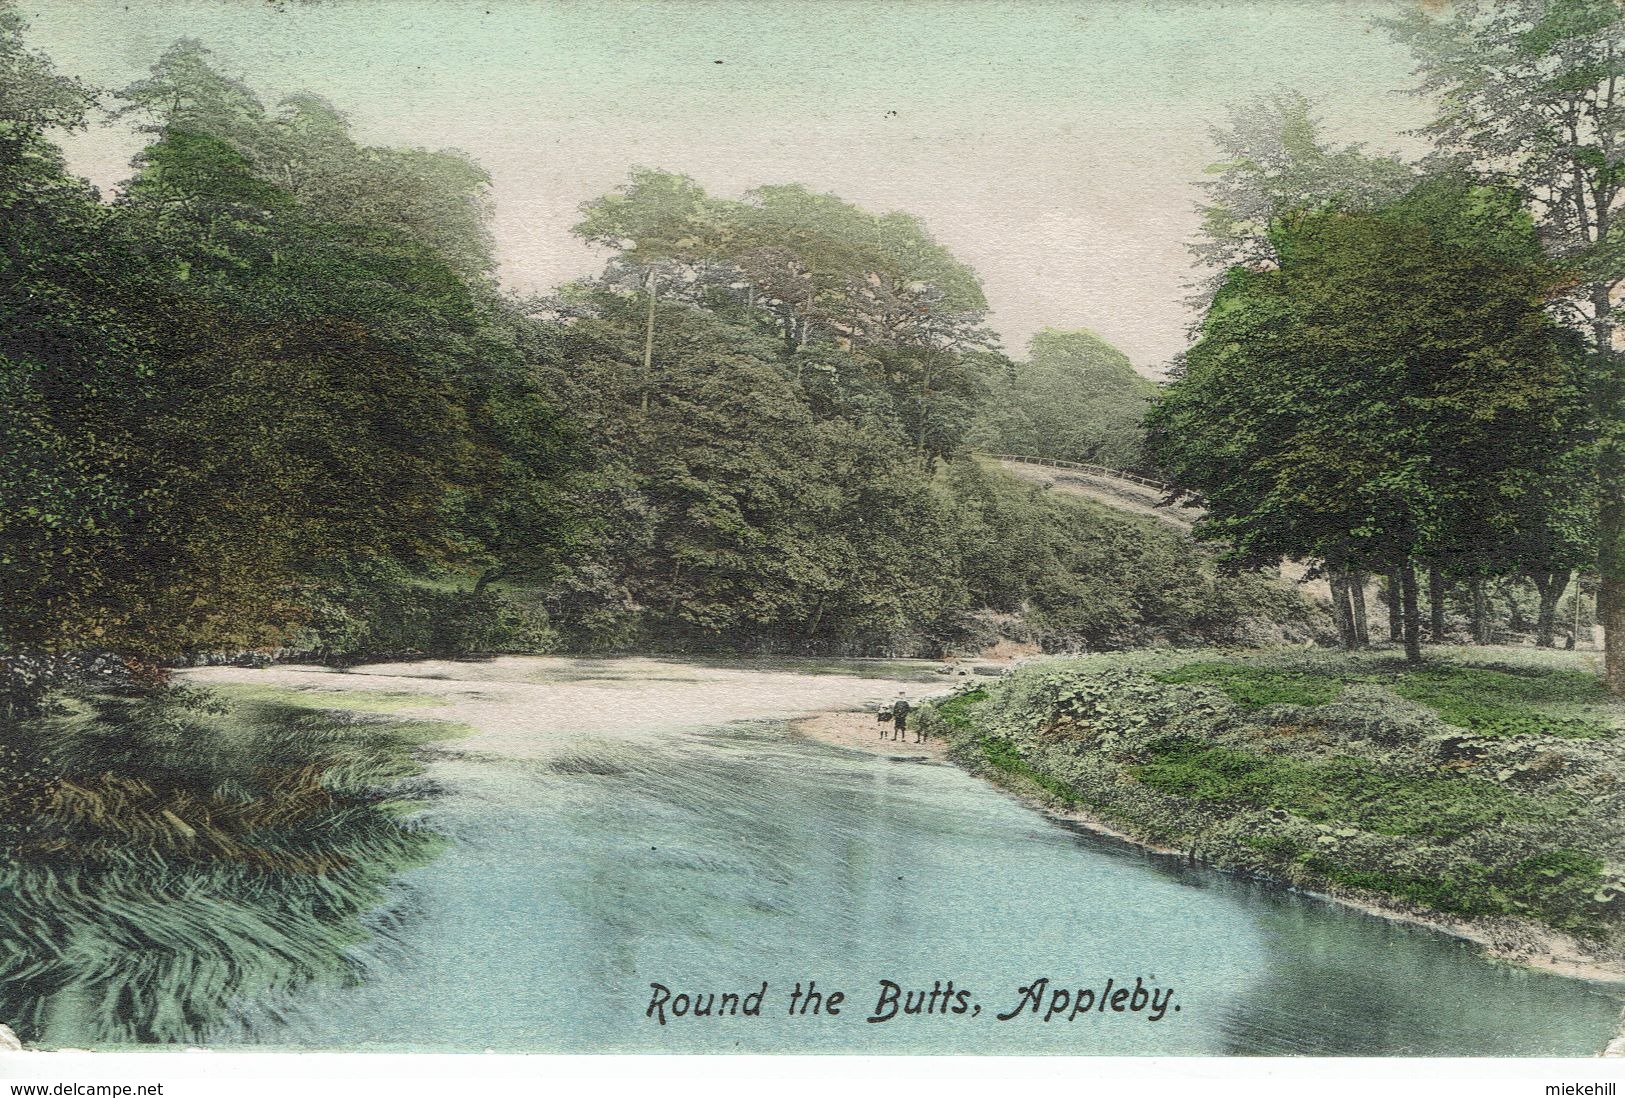 UK-APPLEBY-ROUND THE BUTTS - Appleby-in-Westmorland